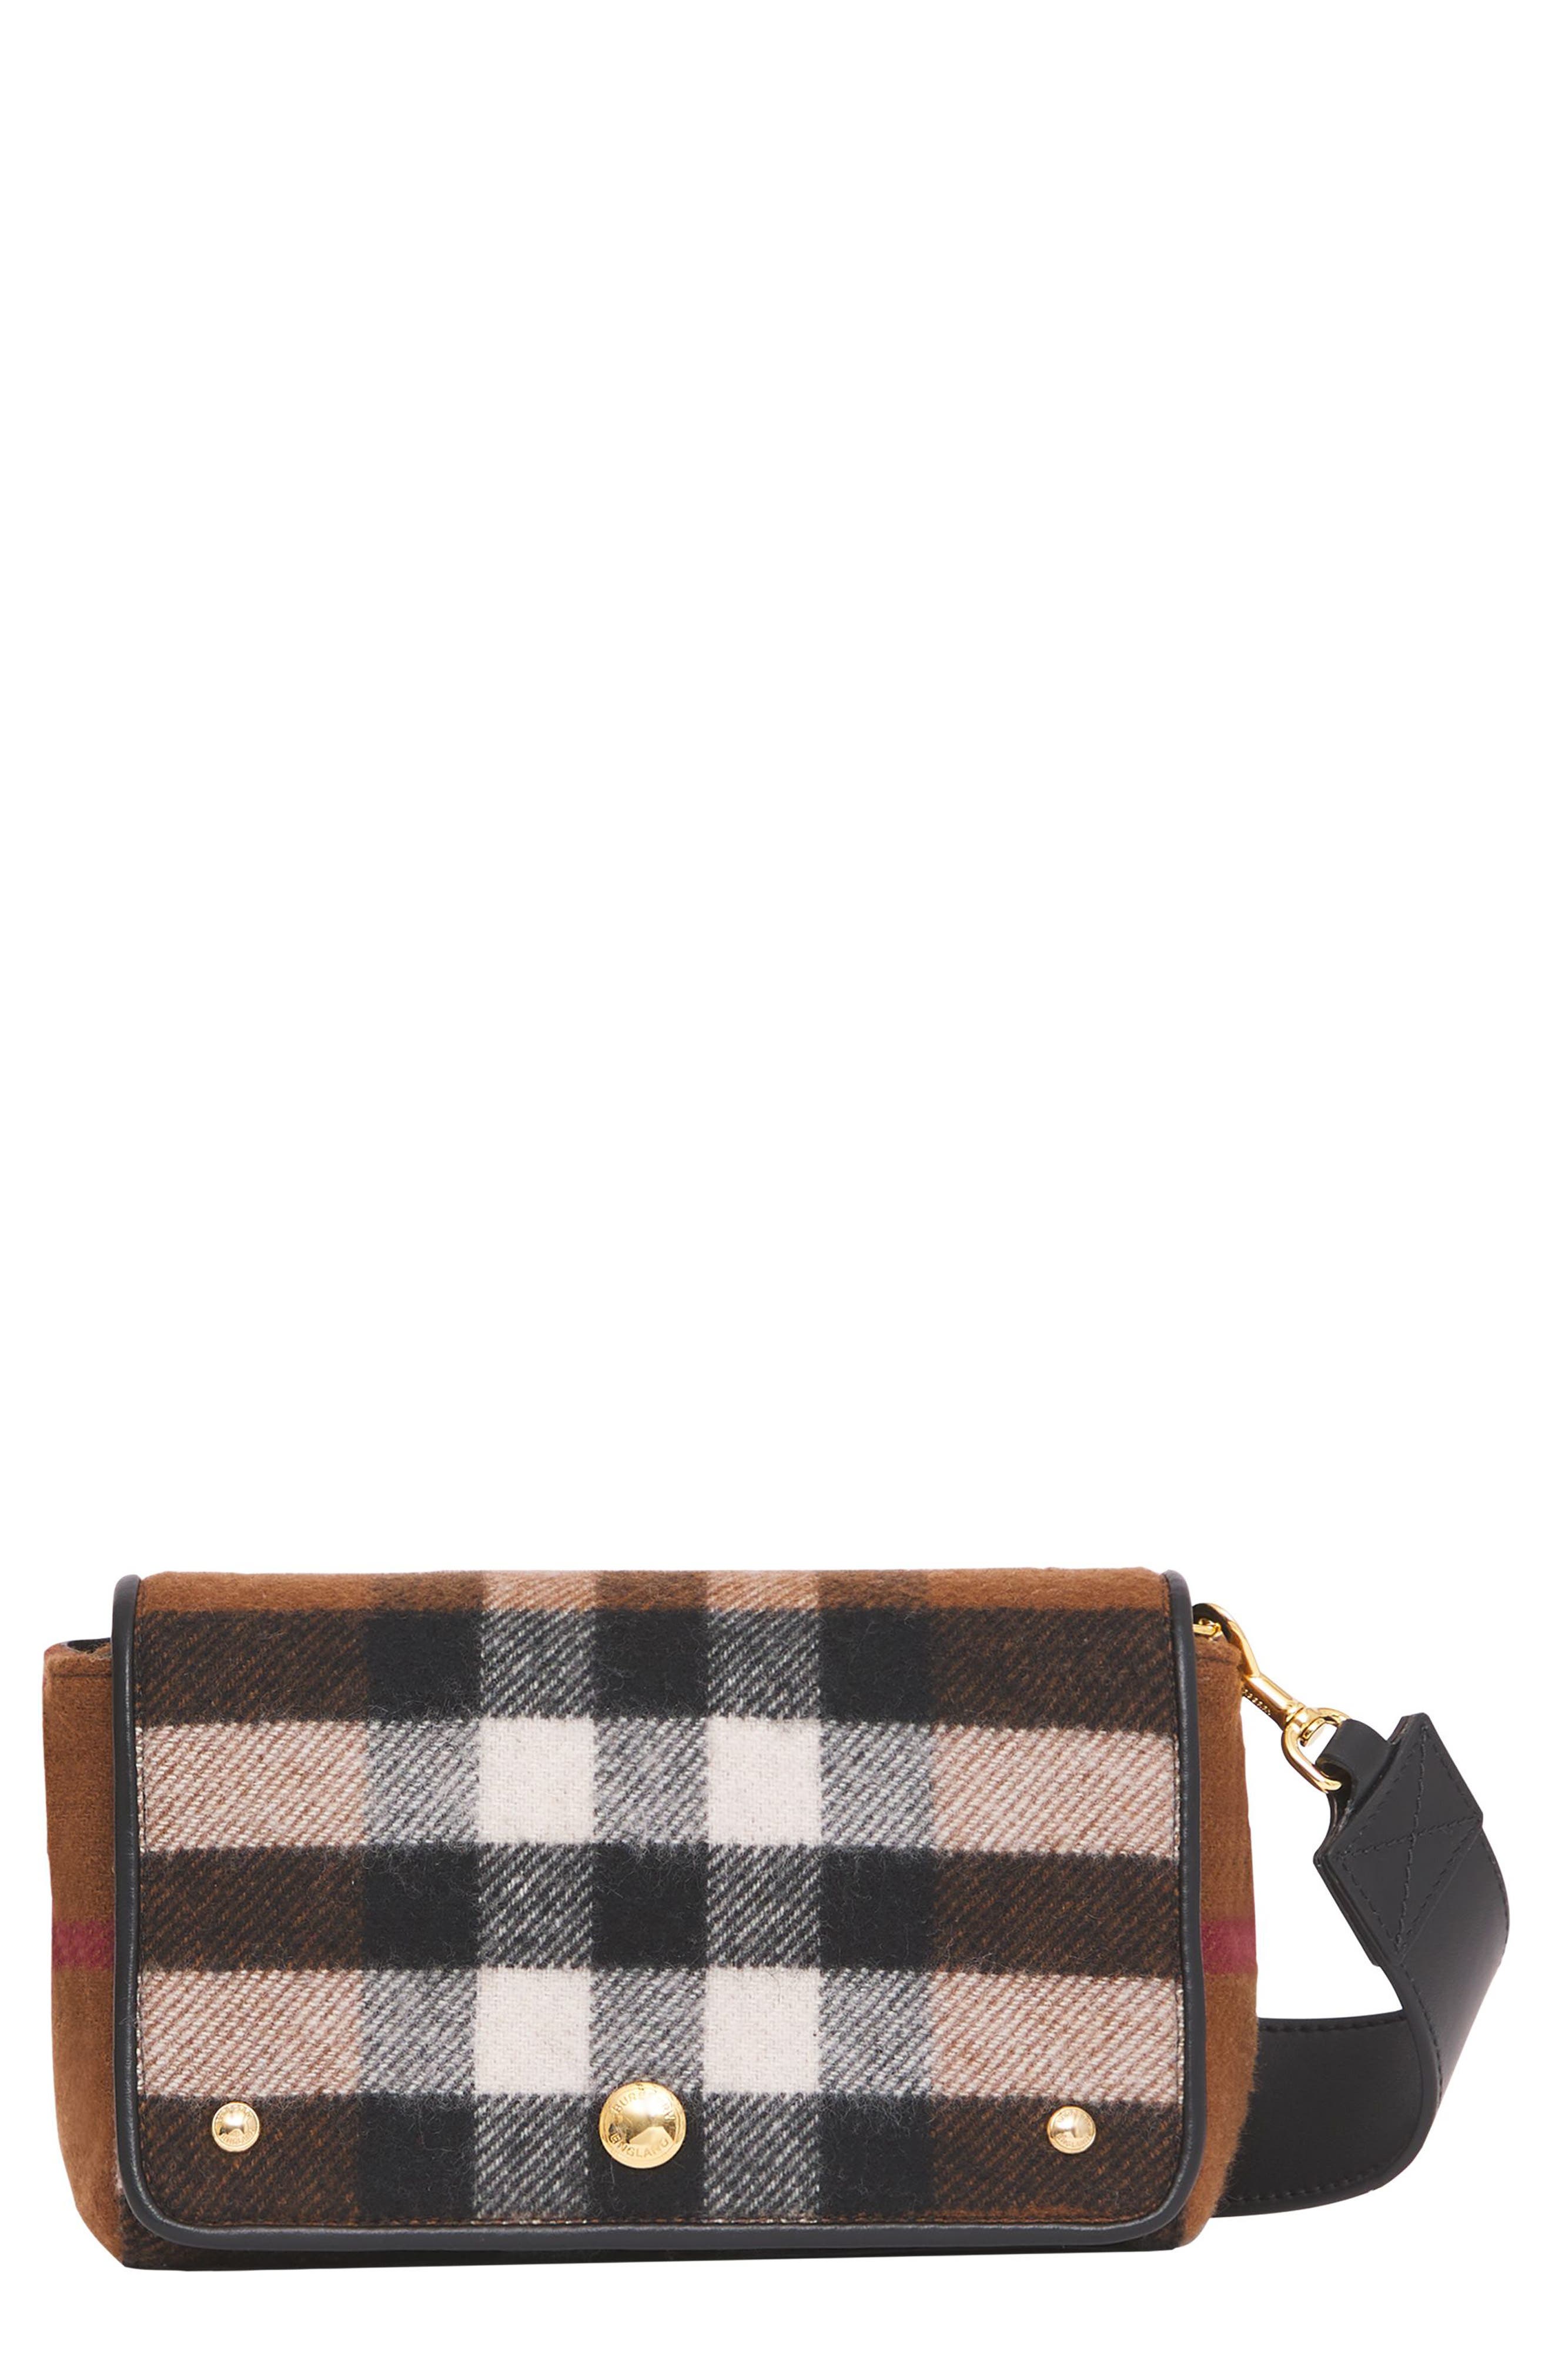 Burberry Small Check Cashmere Crossbody Bag in Birch Brown at Nordstrom